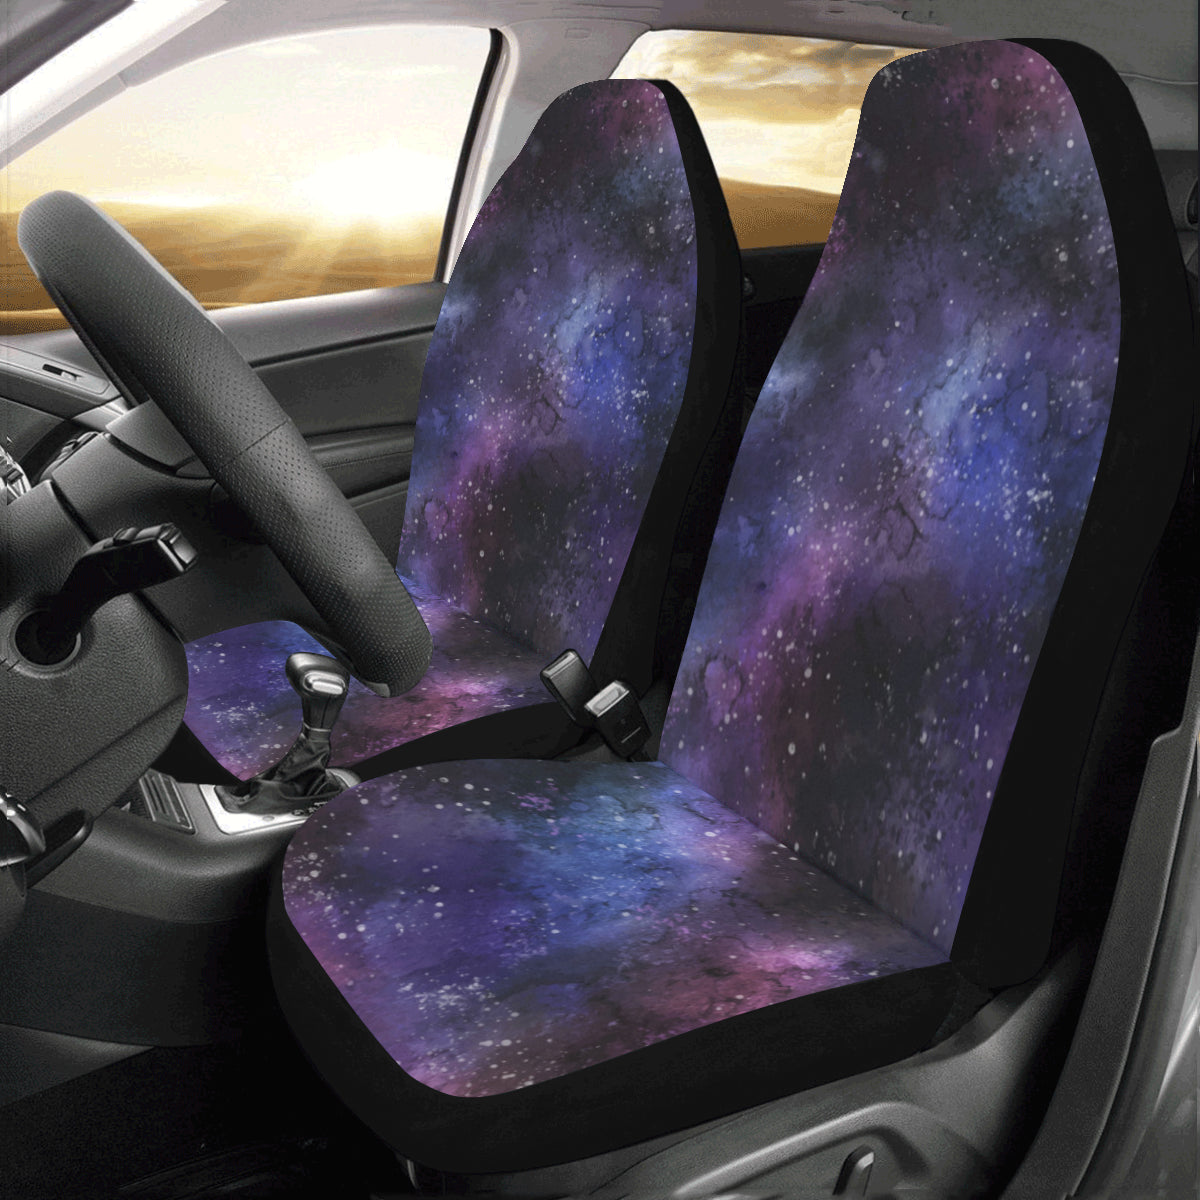 Galaxy Space Car Seat Covers 2 pc, Purple Stars Night Sky Constellation Pattern Front Seat Covers SUV Seat Protector Accessory Decoration Starcove Fashion